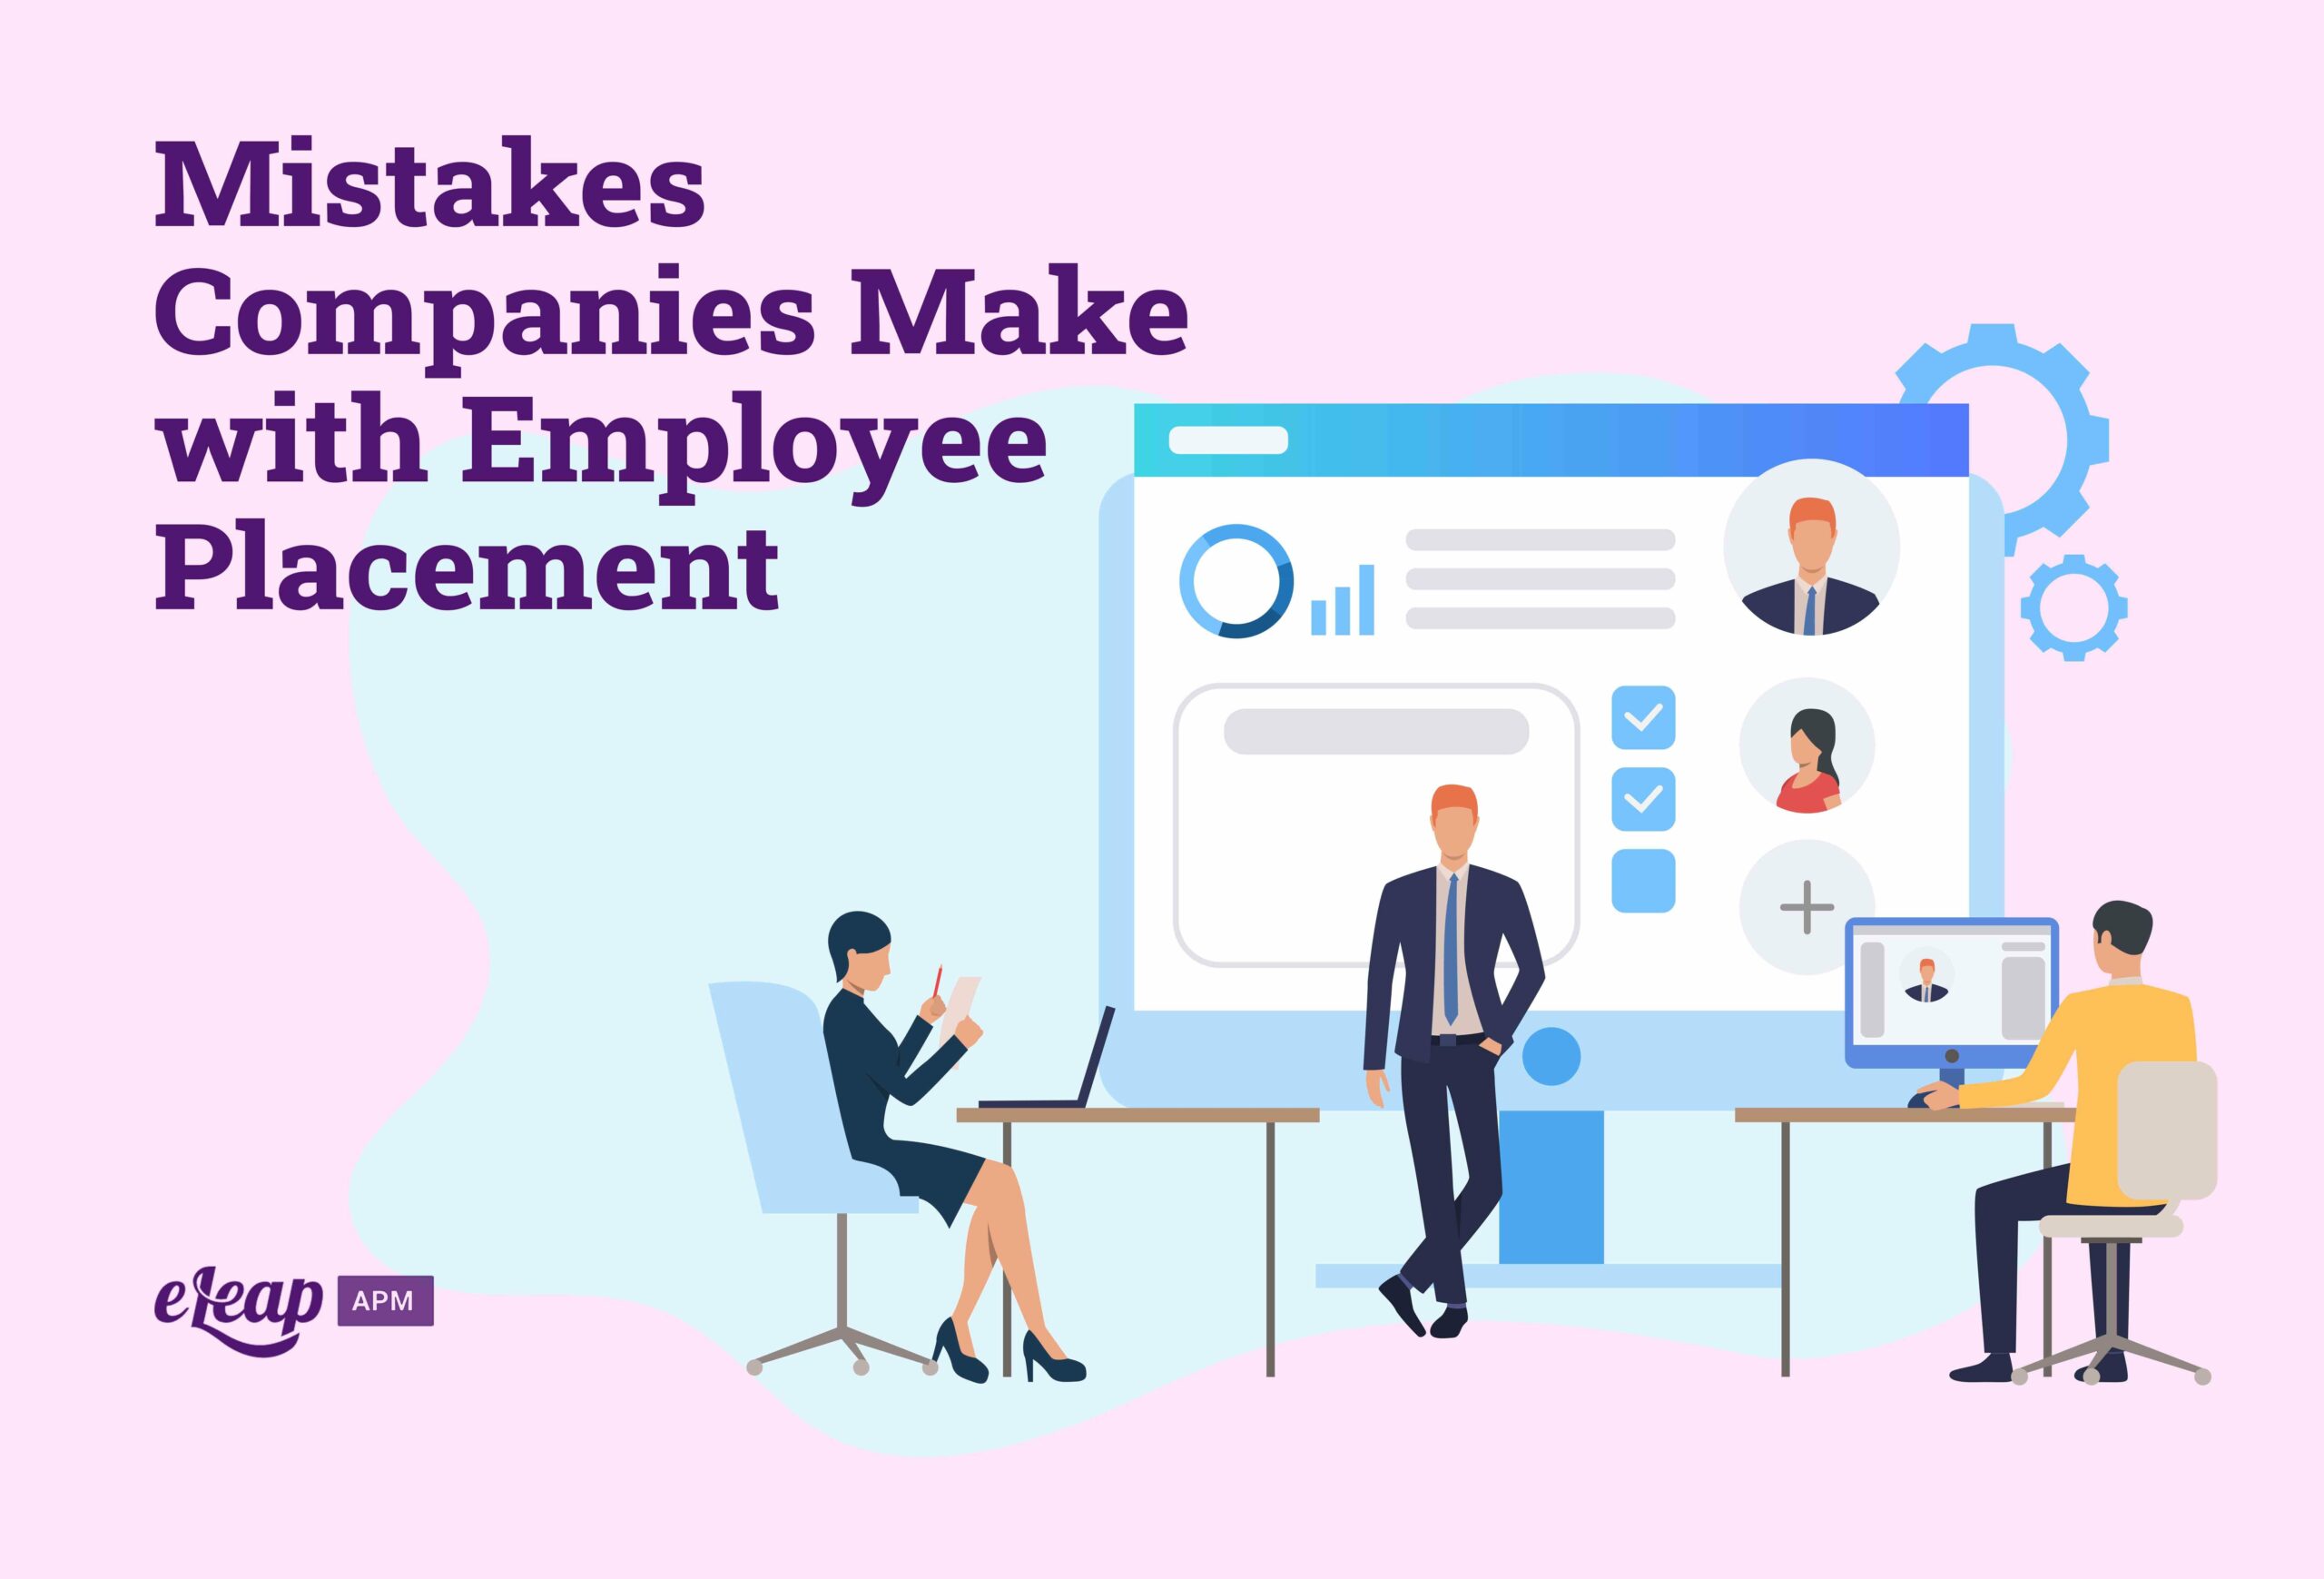 Mistakes Companies Make with Employee Placement